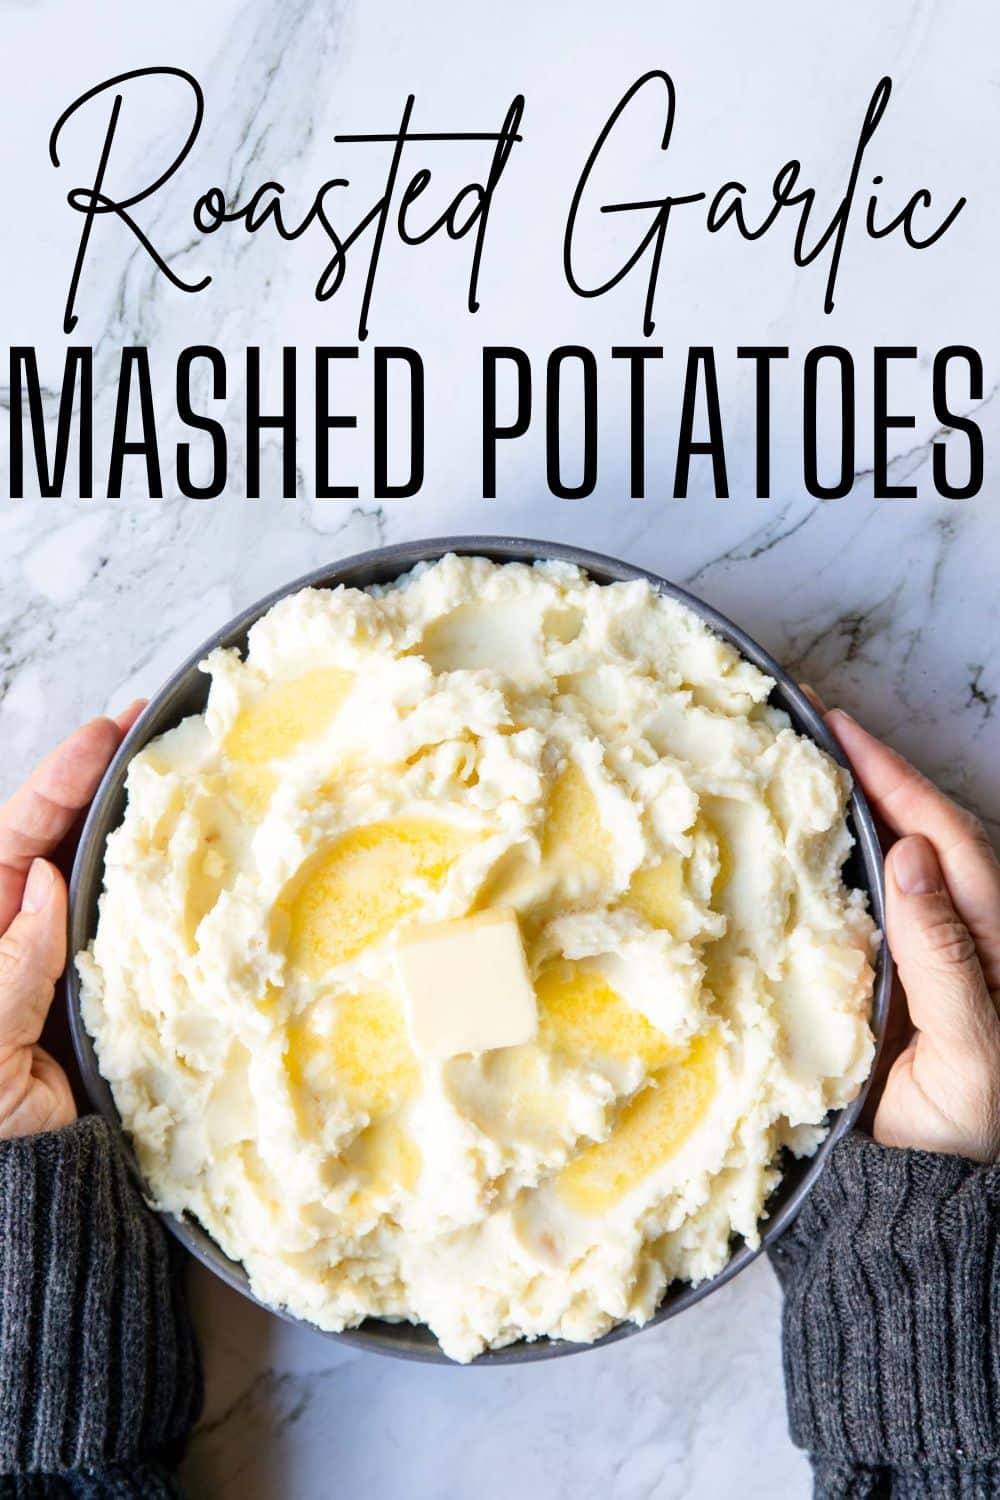 a bowl of mashed potatoes with two hands holding it, with text overlay for Pinterest